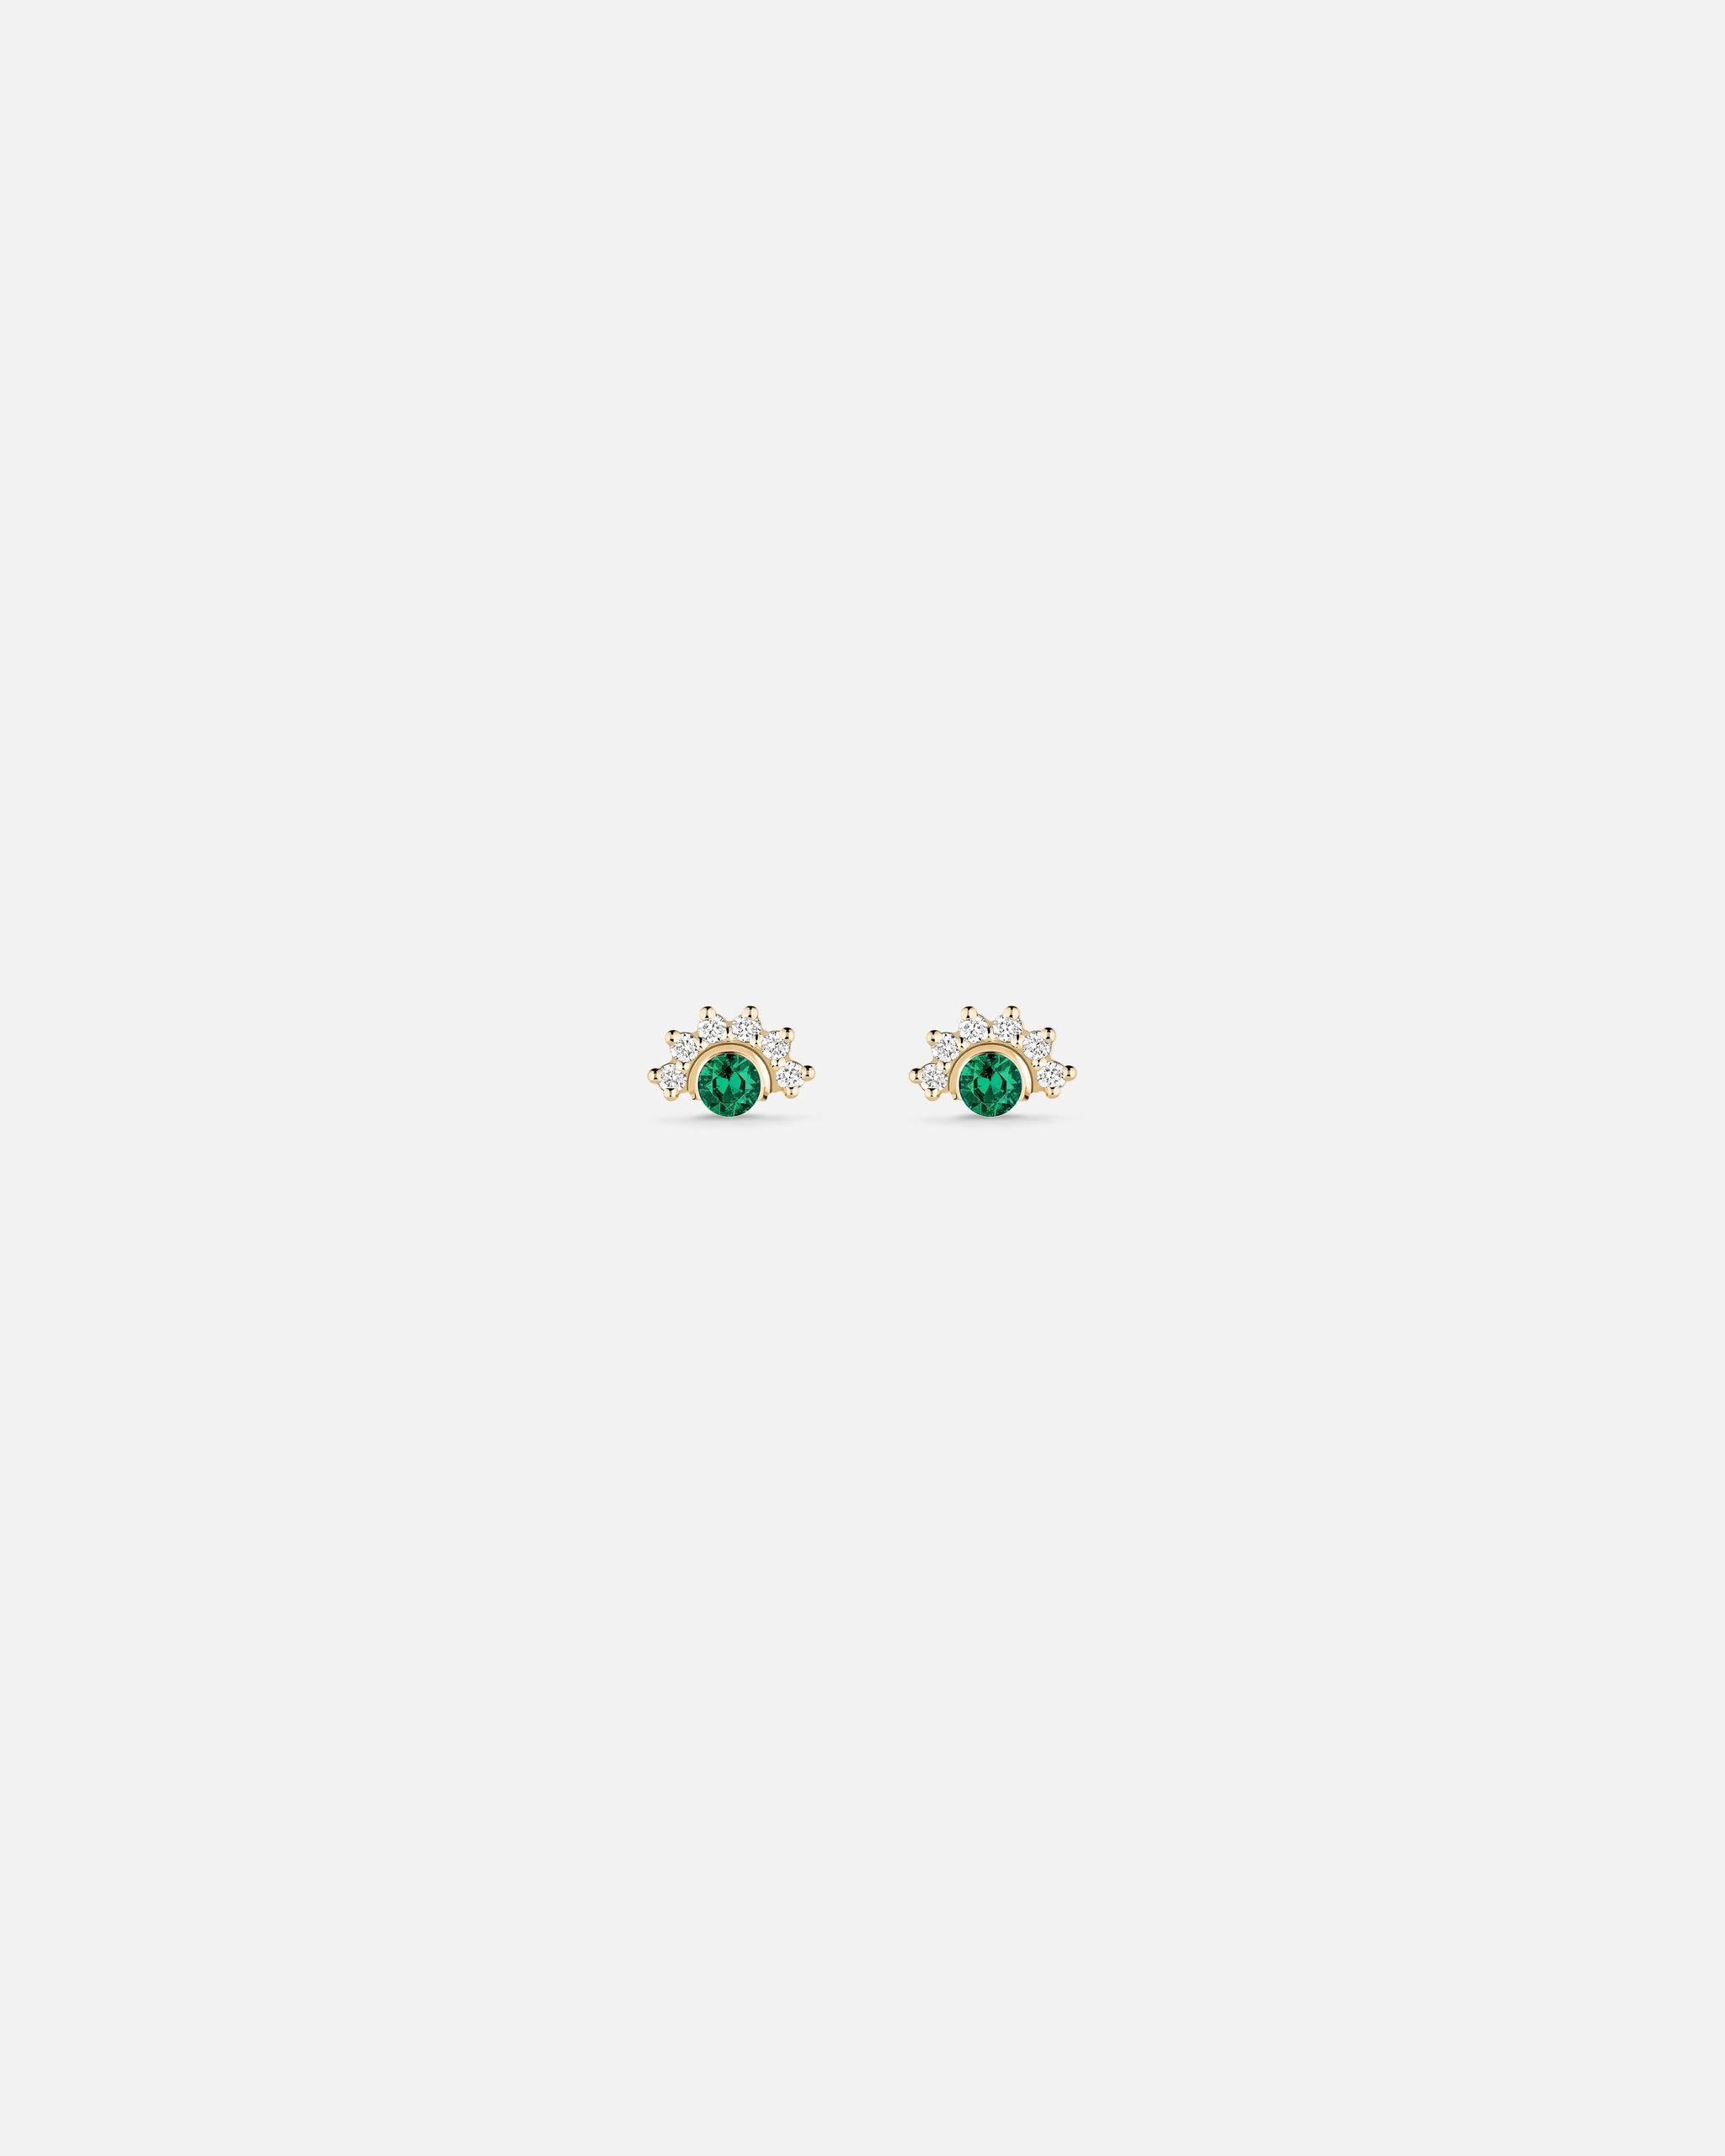 Green Tourmaline Studs in Yellow Gold - Nouvel Heritage - Nouvel Heritage